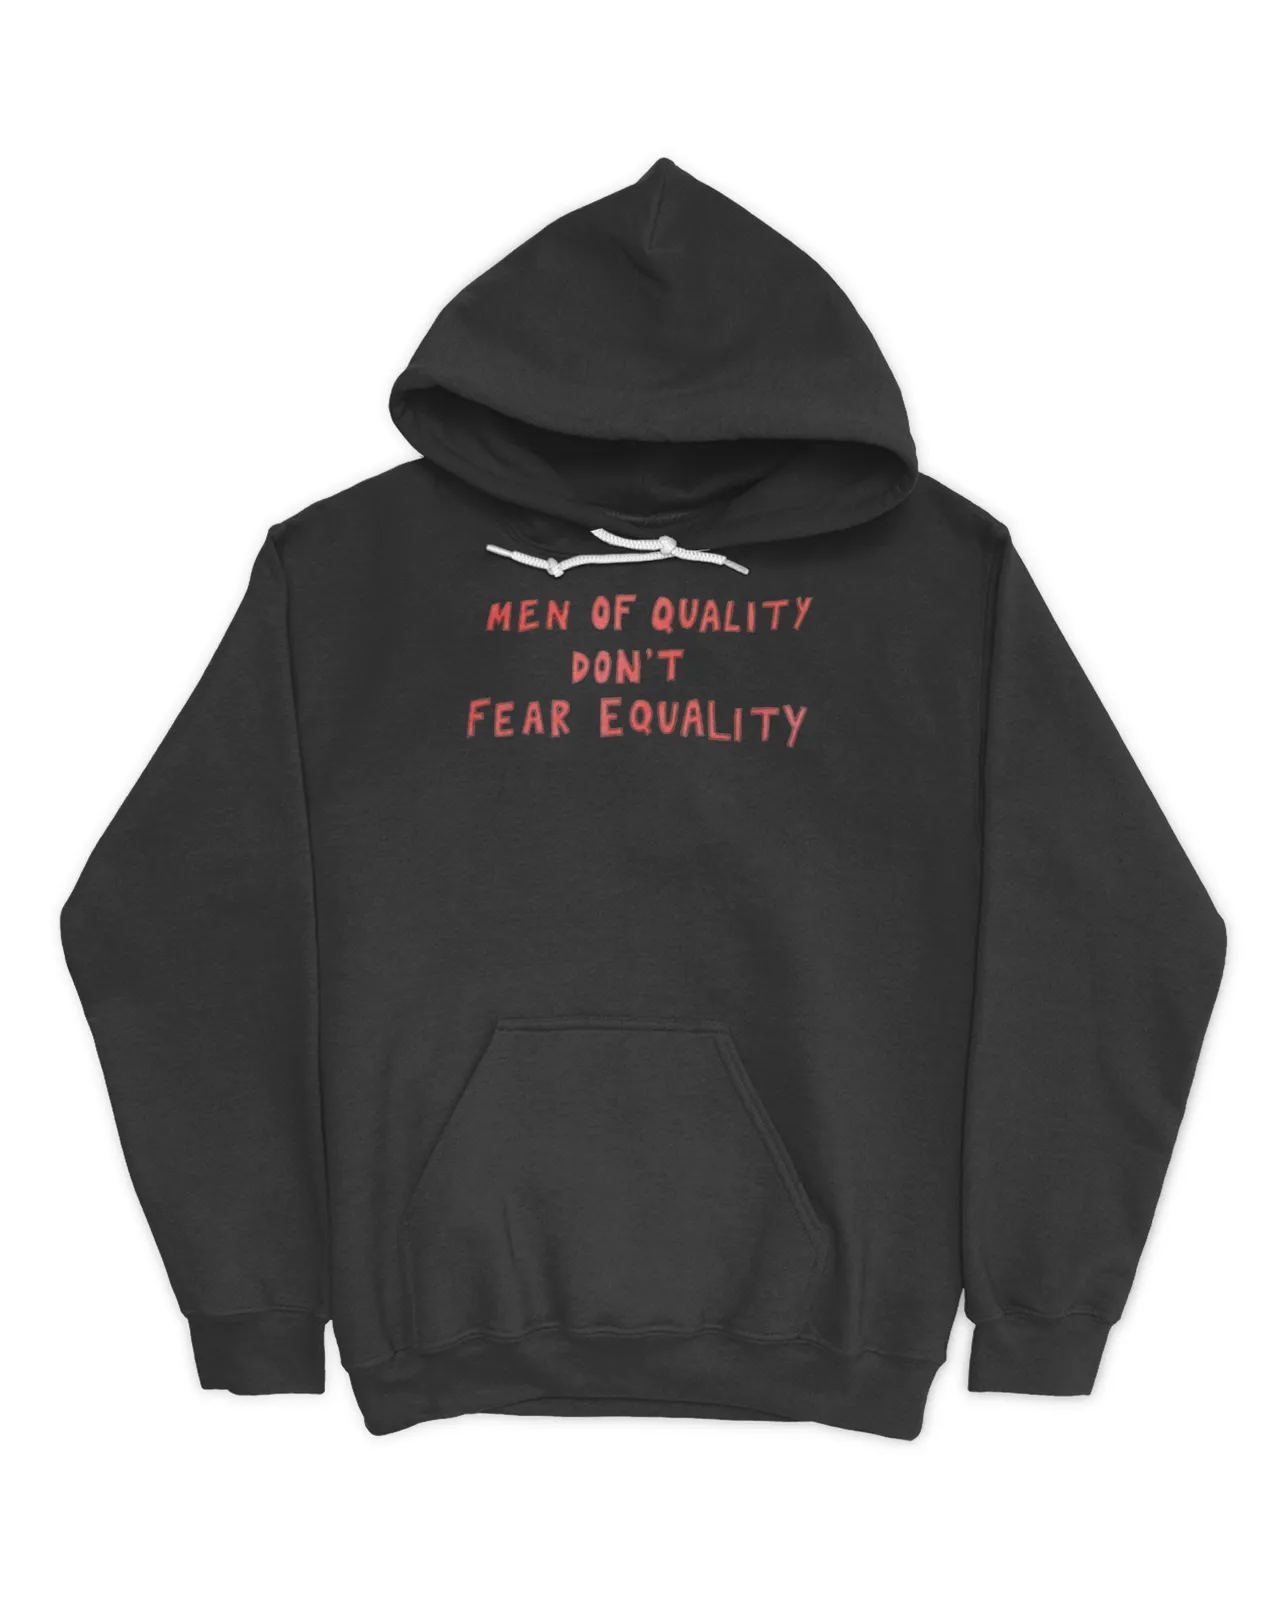 Men Of Quality Don't Fear Equality Shirt